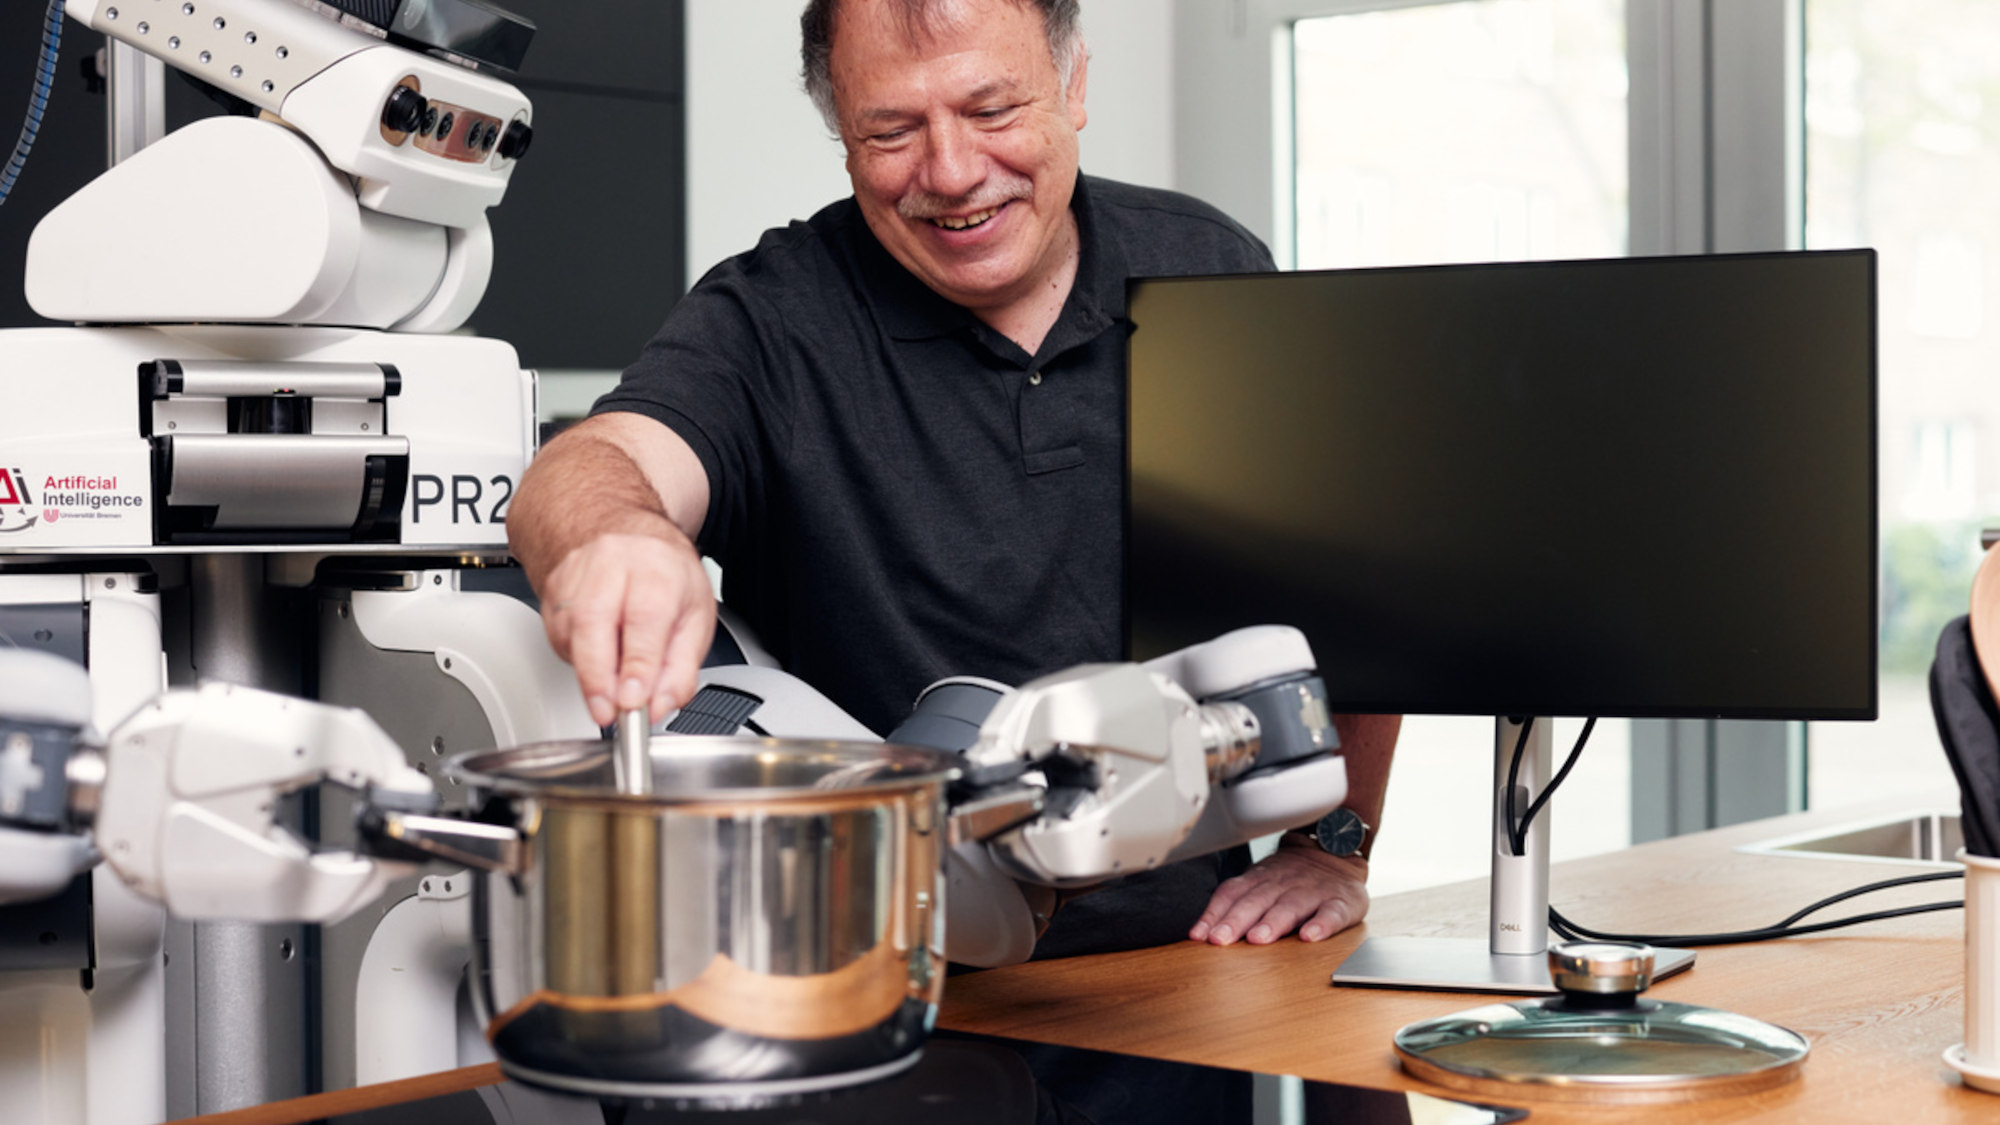 A robot holds a saucepan over the stove, Michael Beetz looks over its shoulder and stirs in the pot.